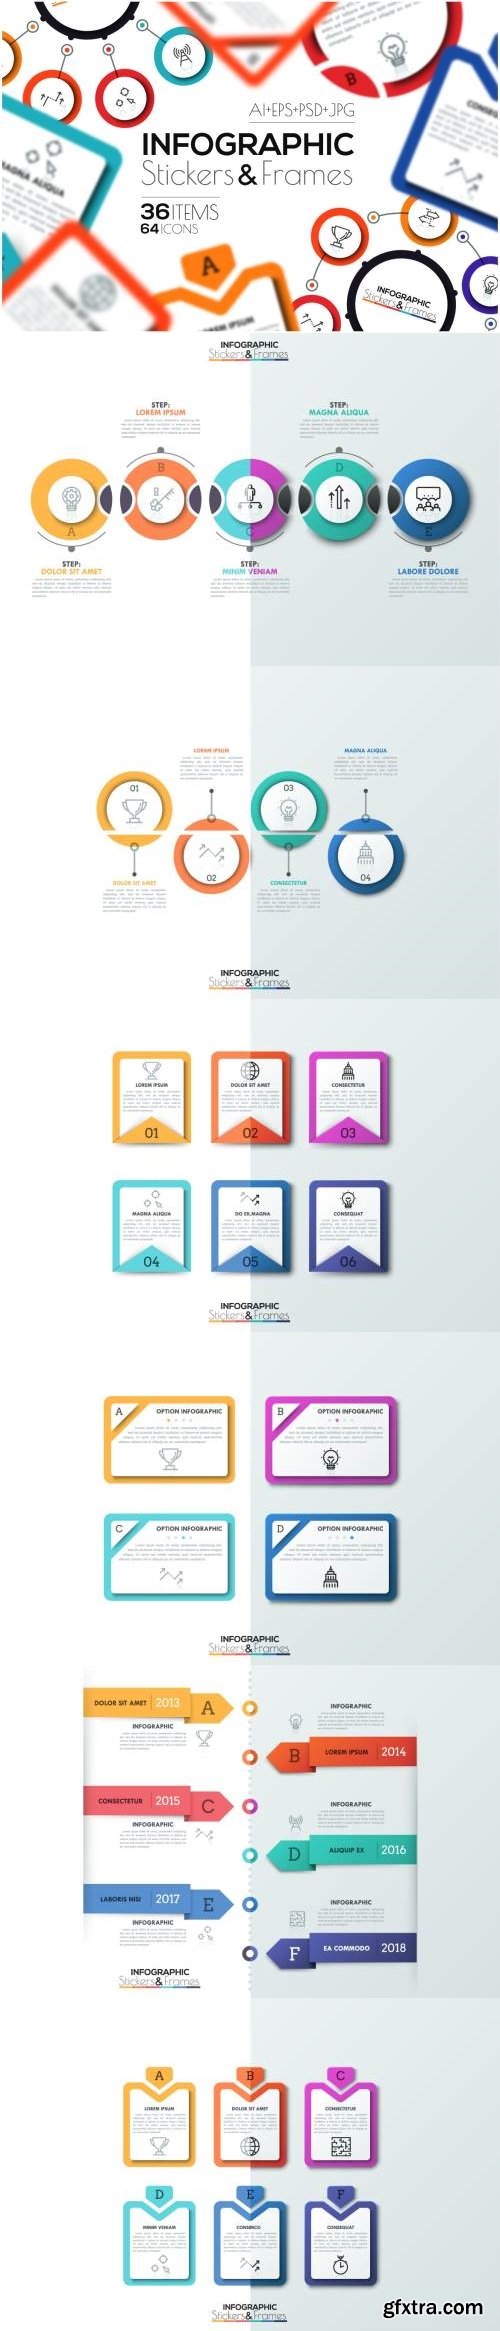 Infographic Stickers & Frames